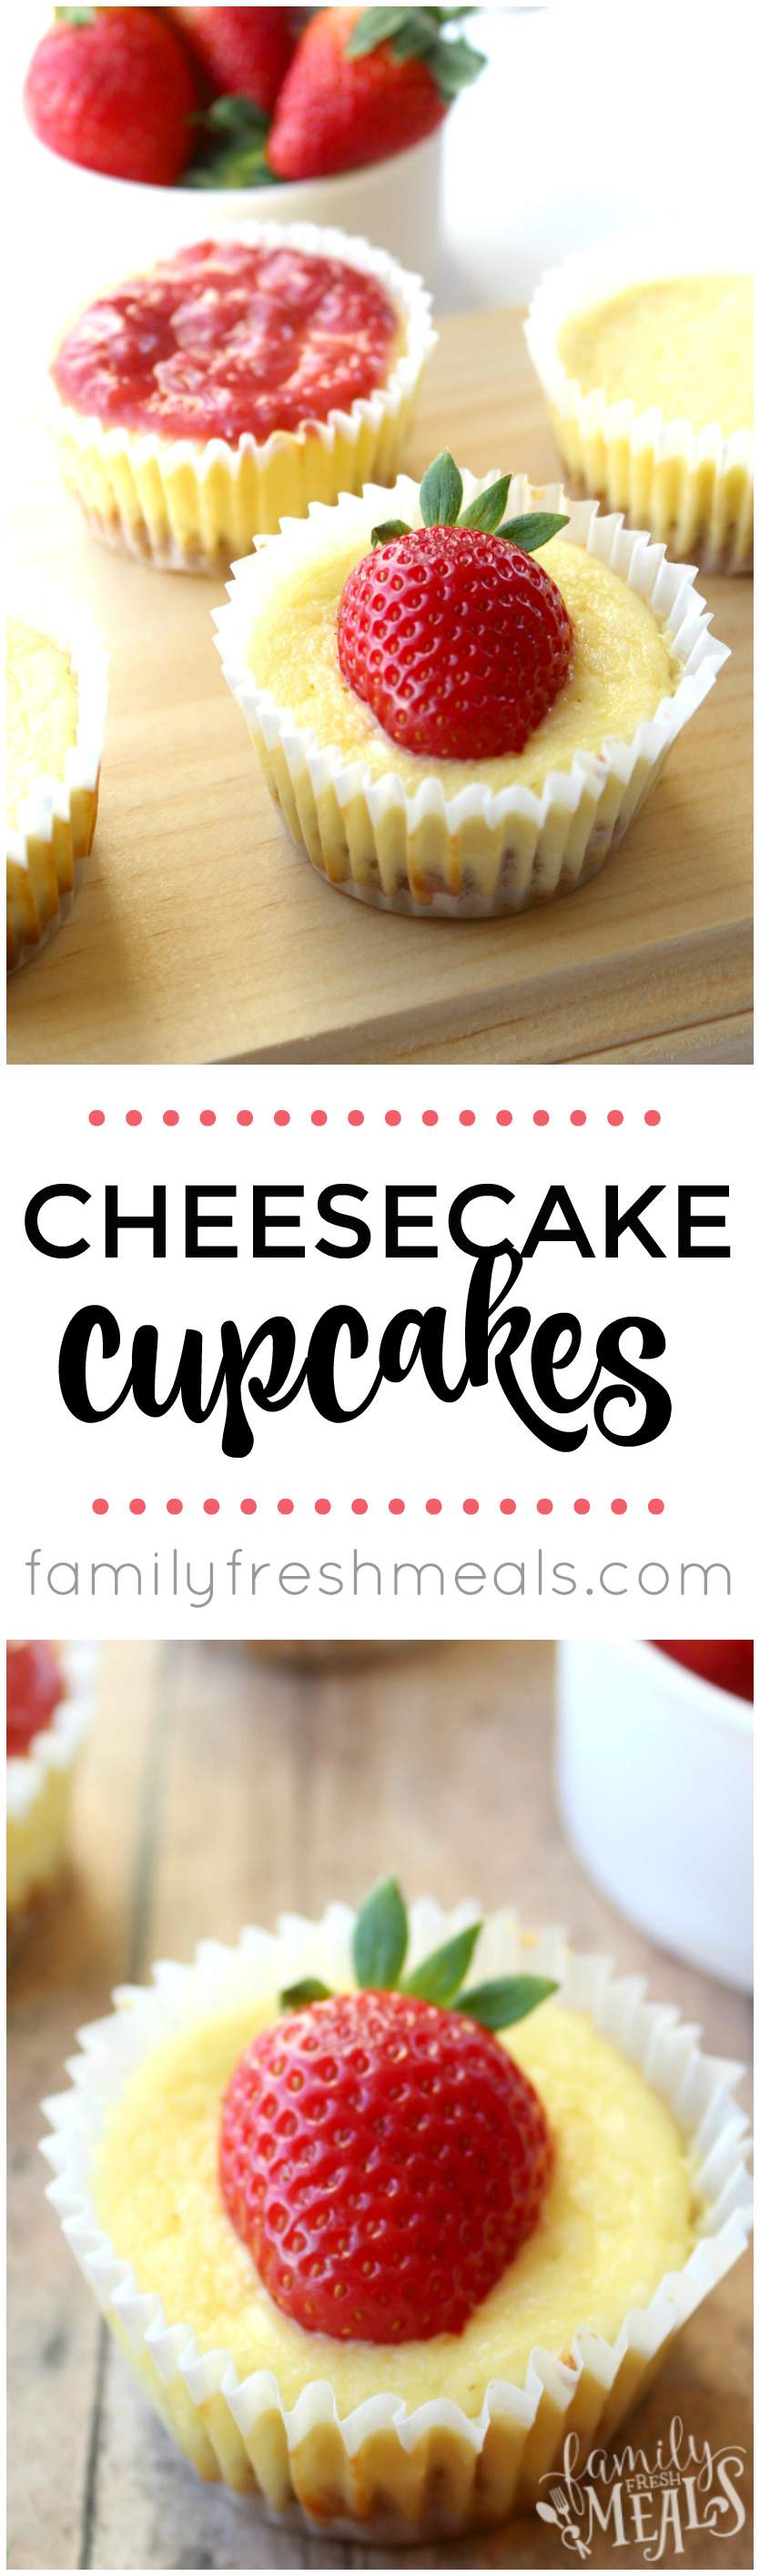 My latest twist on cheesecake is these little Strawberry Cheesecake Cupcakes. These are baked in a cupcake tin, so the portions are already dished out! via @familyfresh